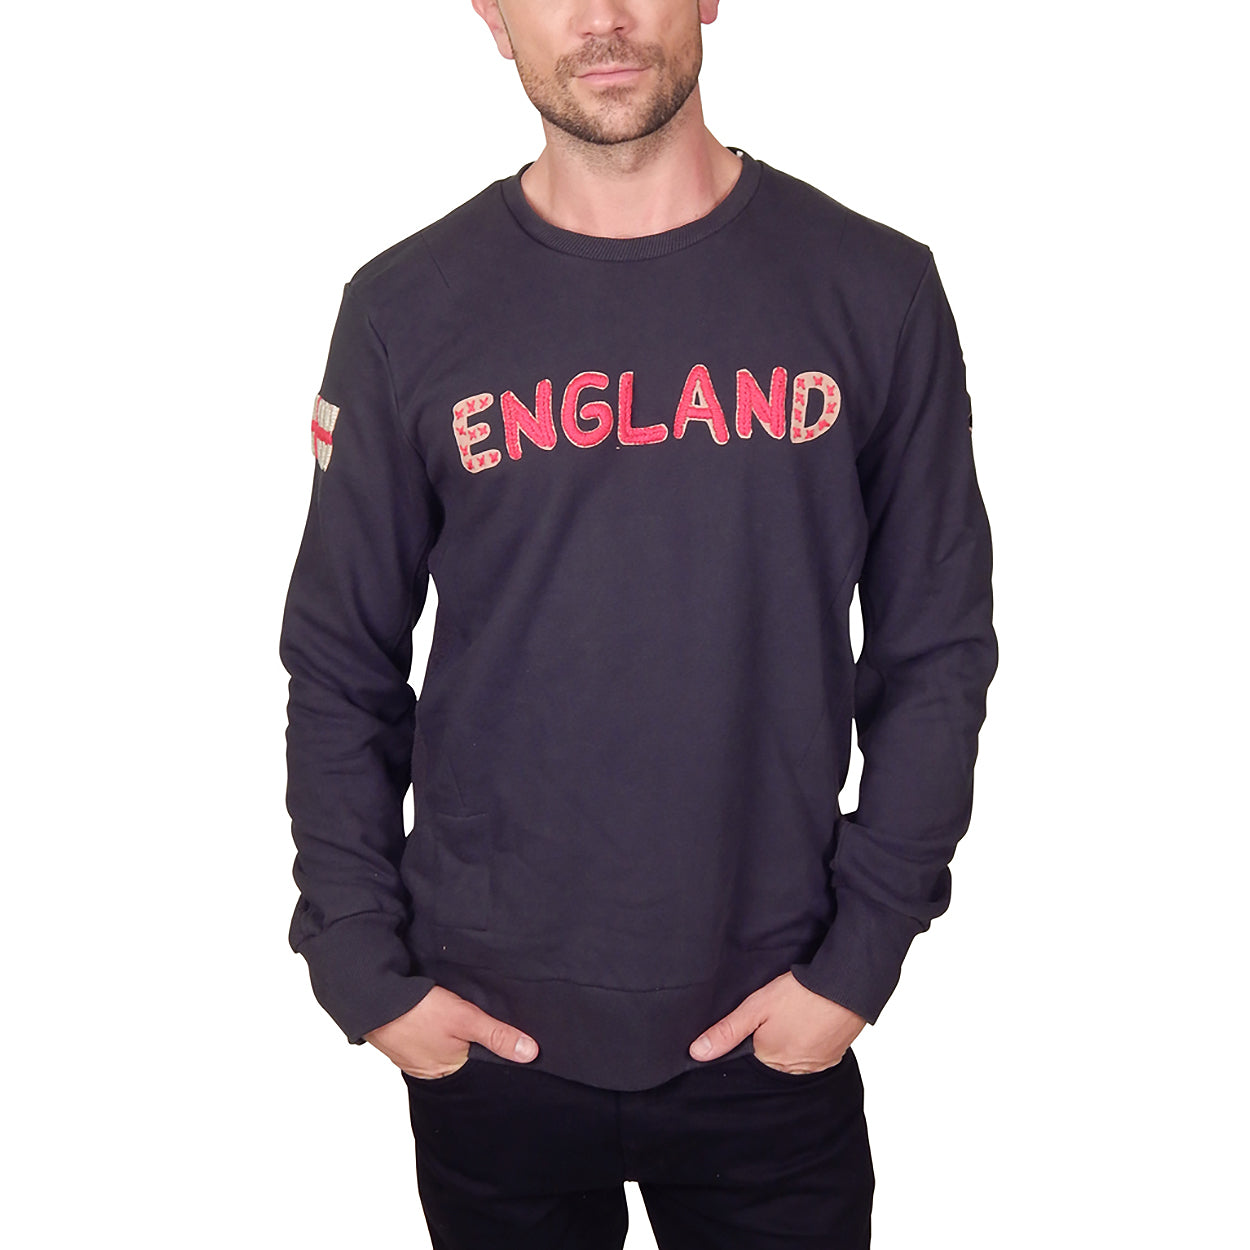 RELIGION - &quot;ENGLAND&quot; Embroidered Sweatshirt in Washed Black